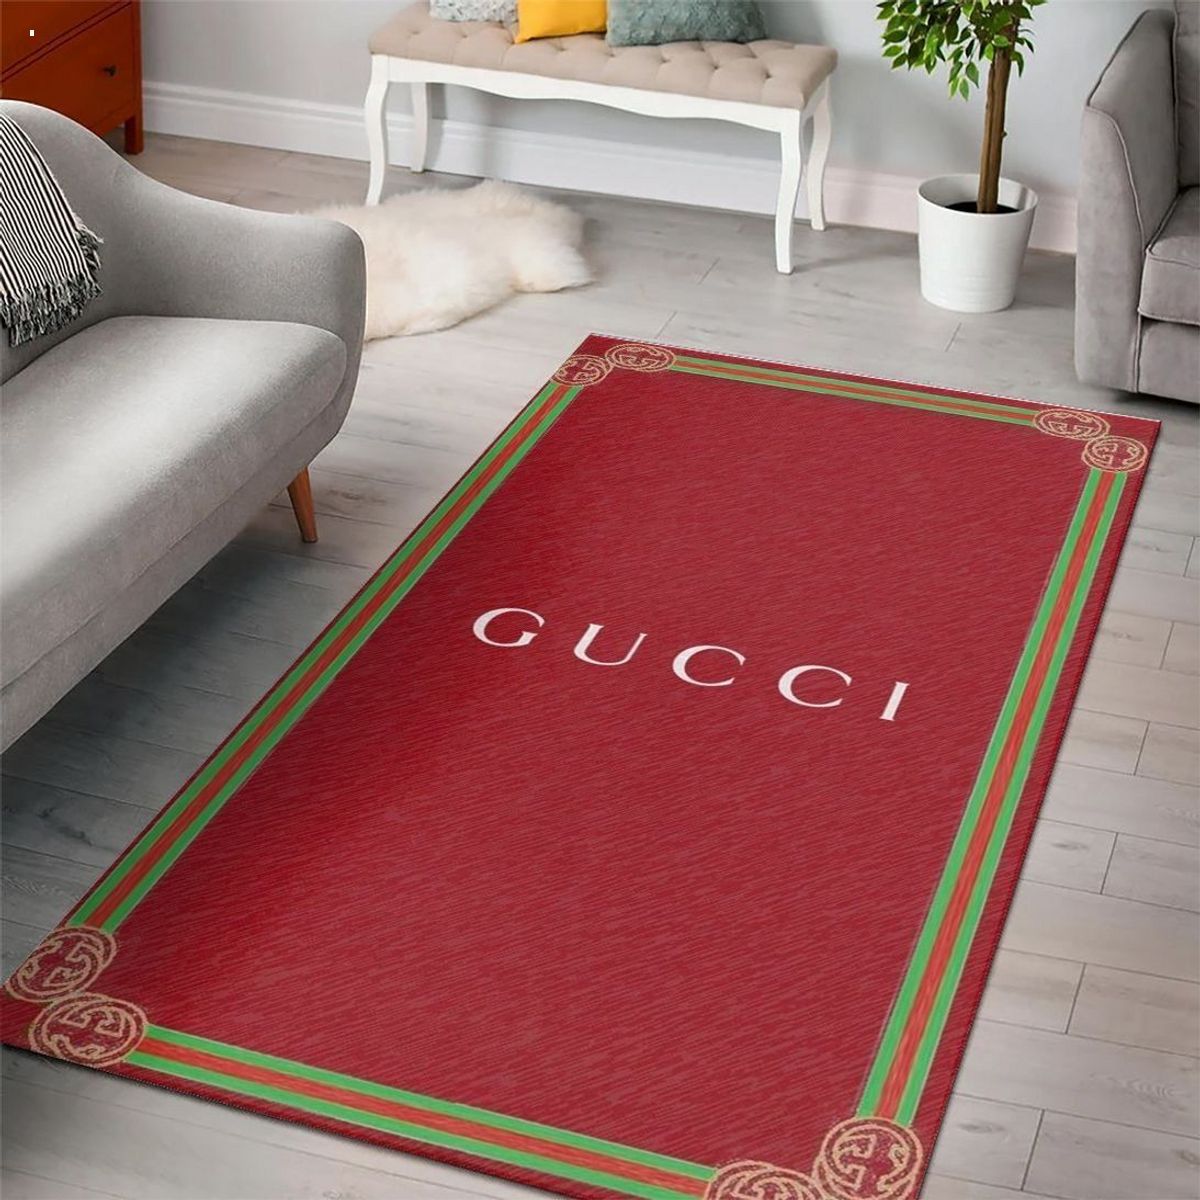 Gucci Red Mix Green Luxury Brand Carpet Rug Limited Edition